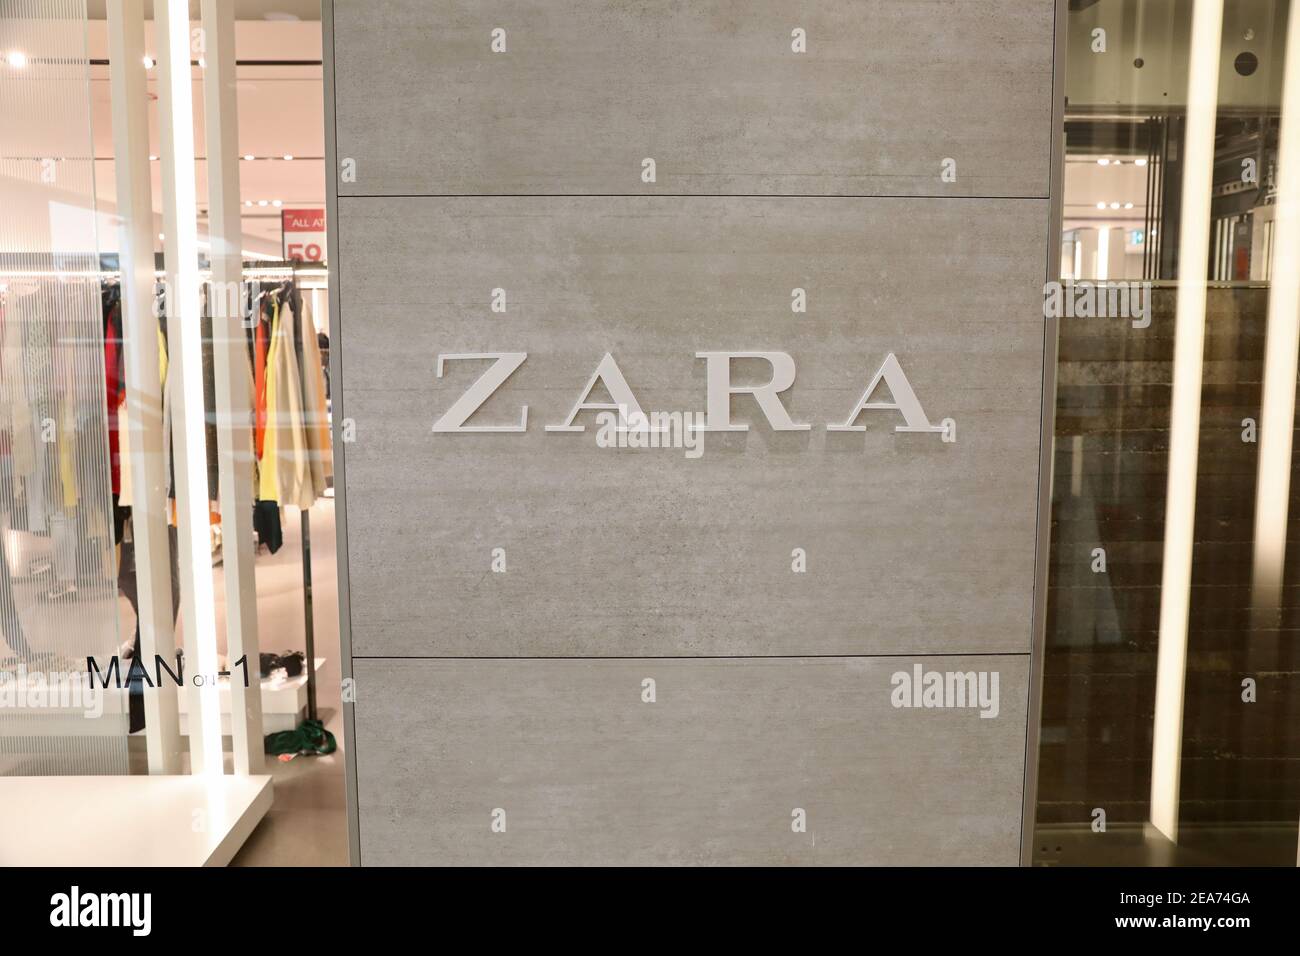 Zara Inside Interior High Resolution Stock Photography and Images - Alamy